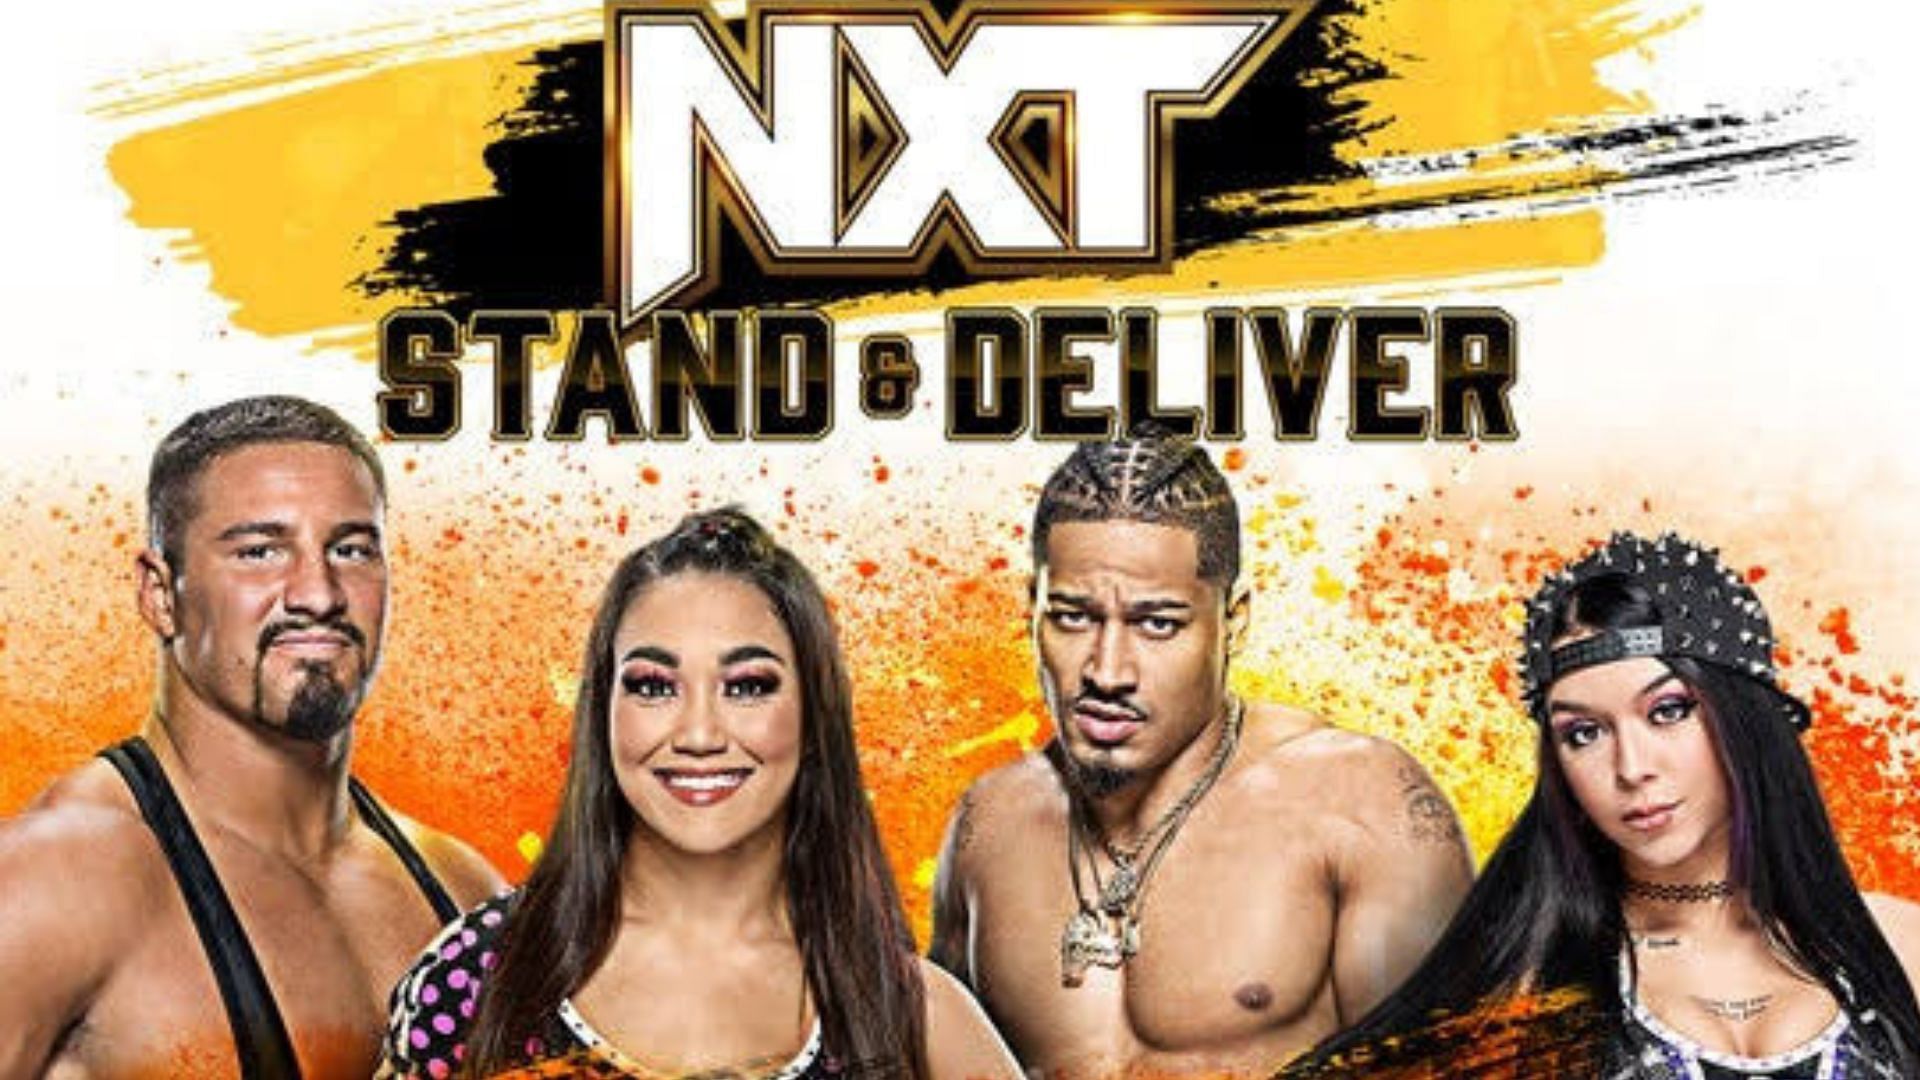 NXT Stand and Deliver 2023 promises to be an epic event